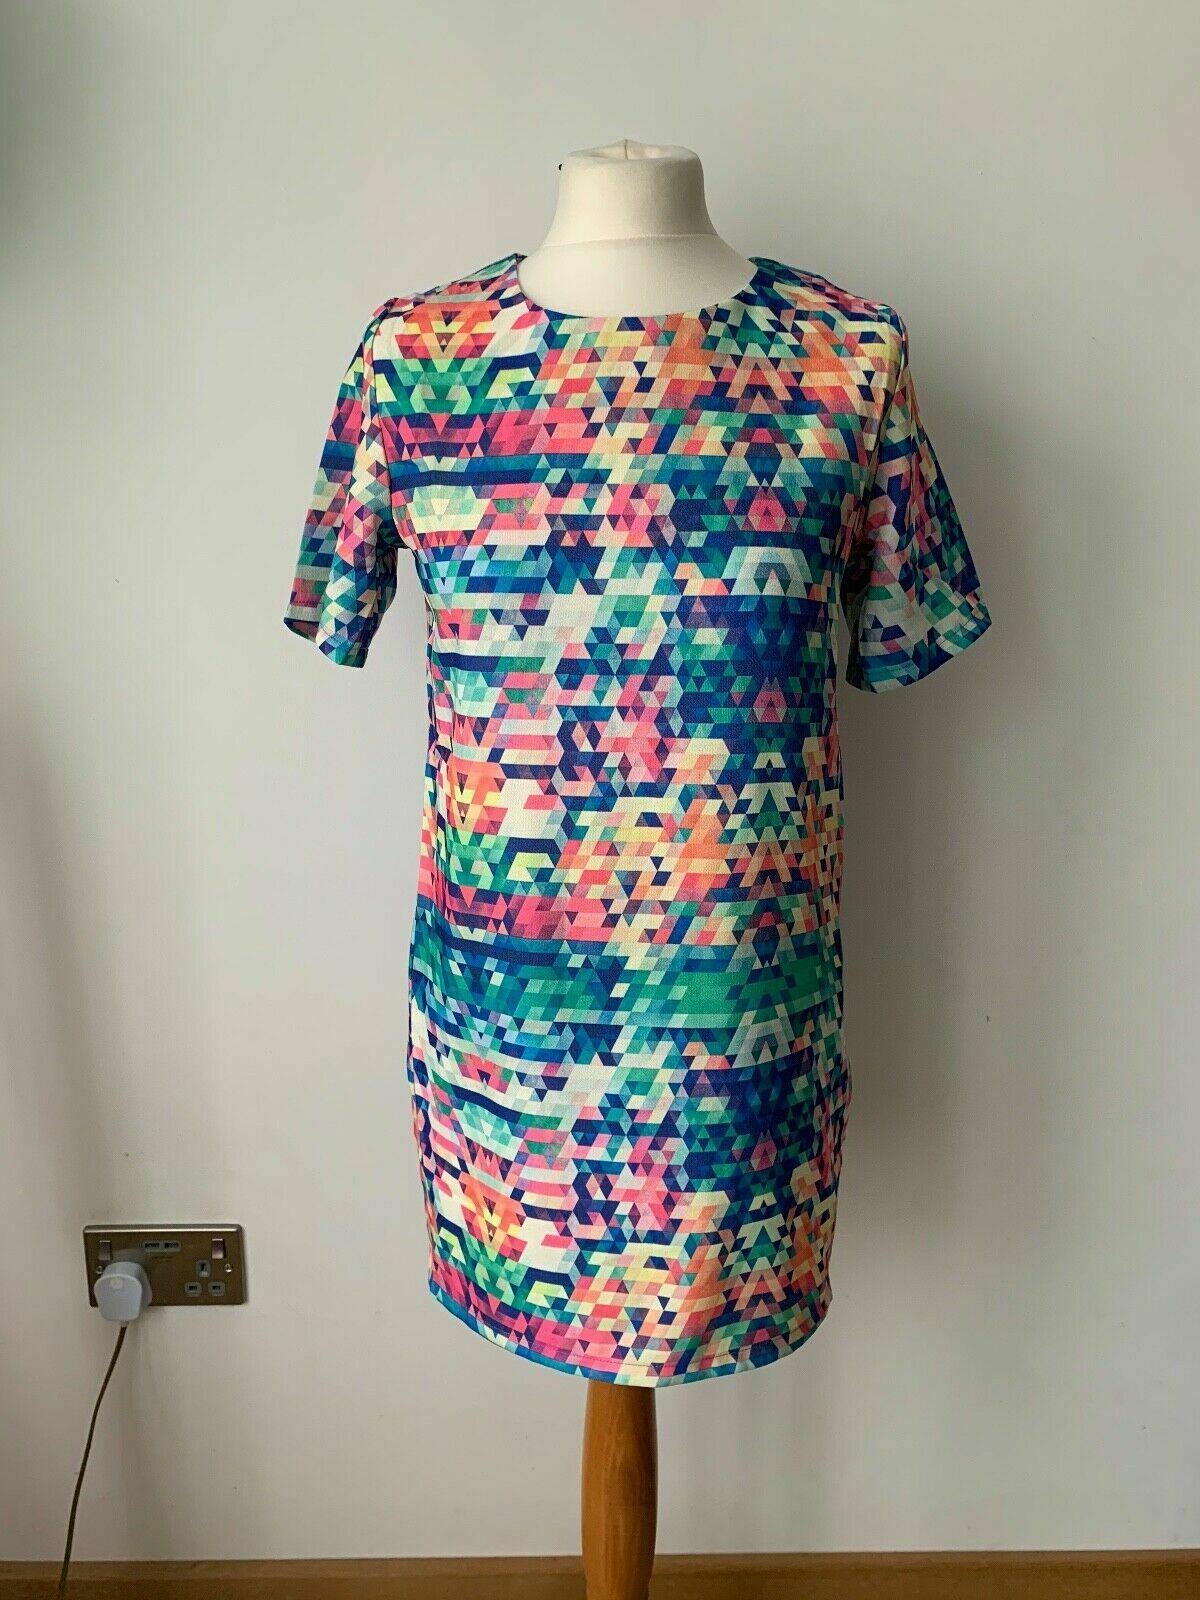 New Look Cameo Rose Shift Dress Geometric Bright Colourful Size 8 & 12 available